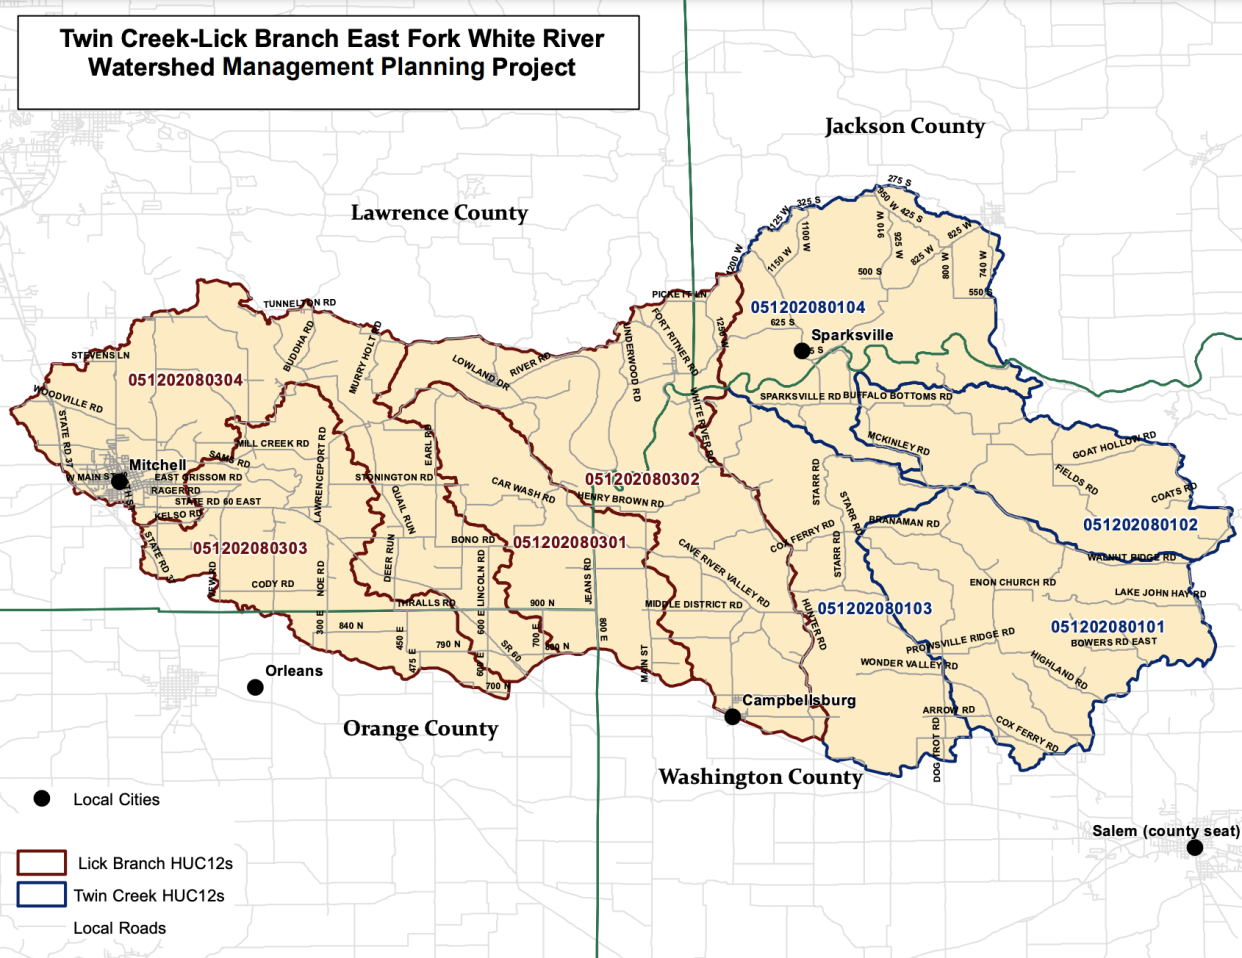 A map outlining the Twin Creek Lick Branch Watershed boundaries.